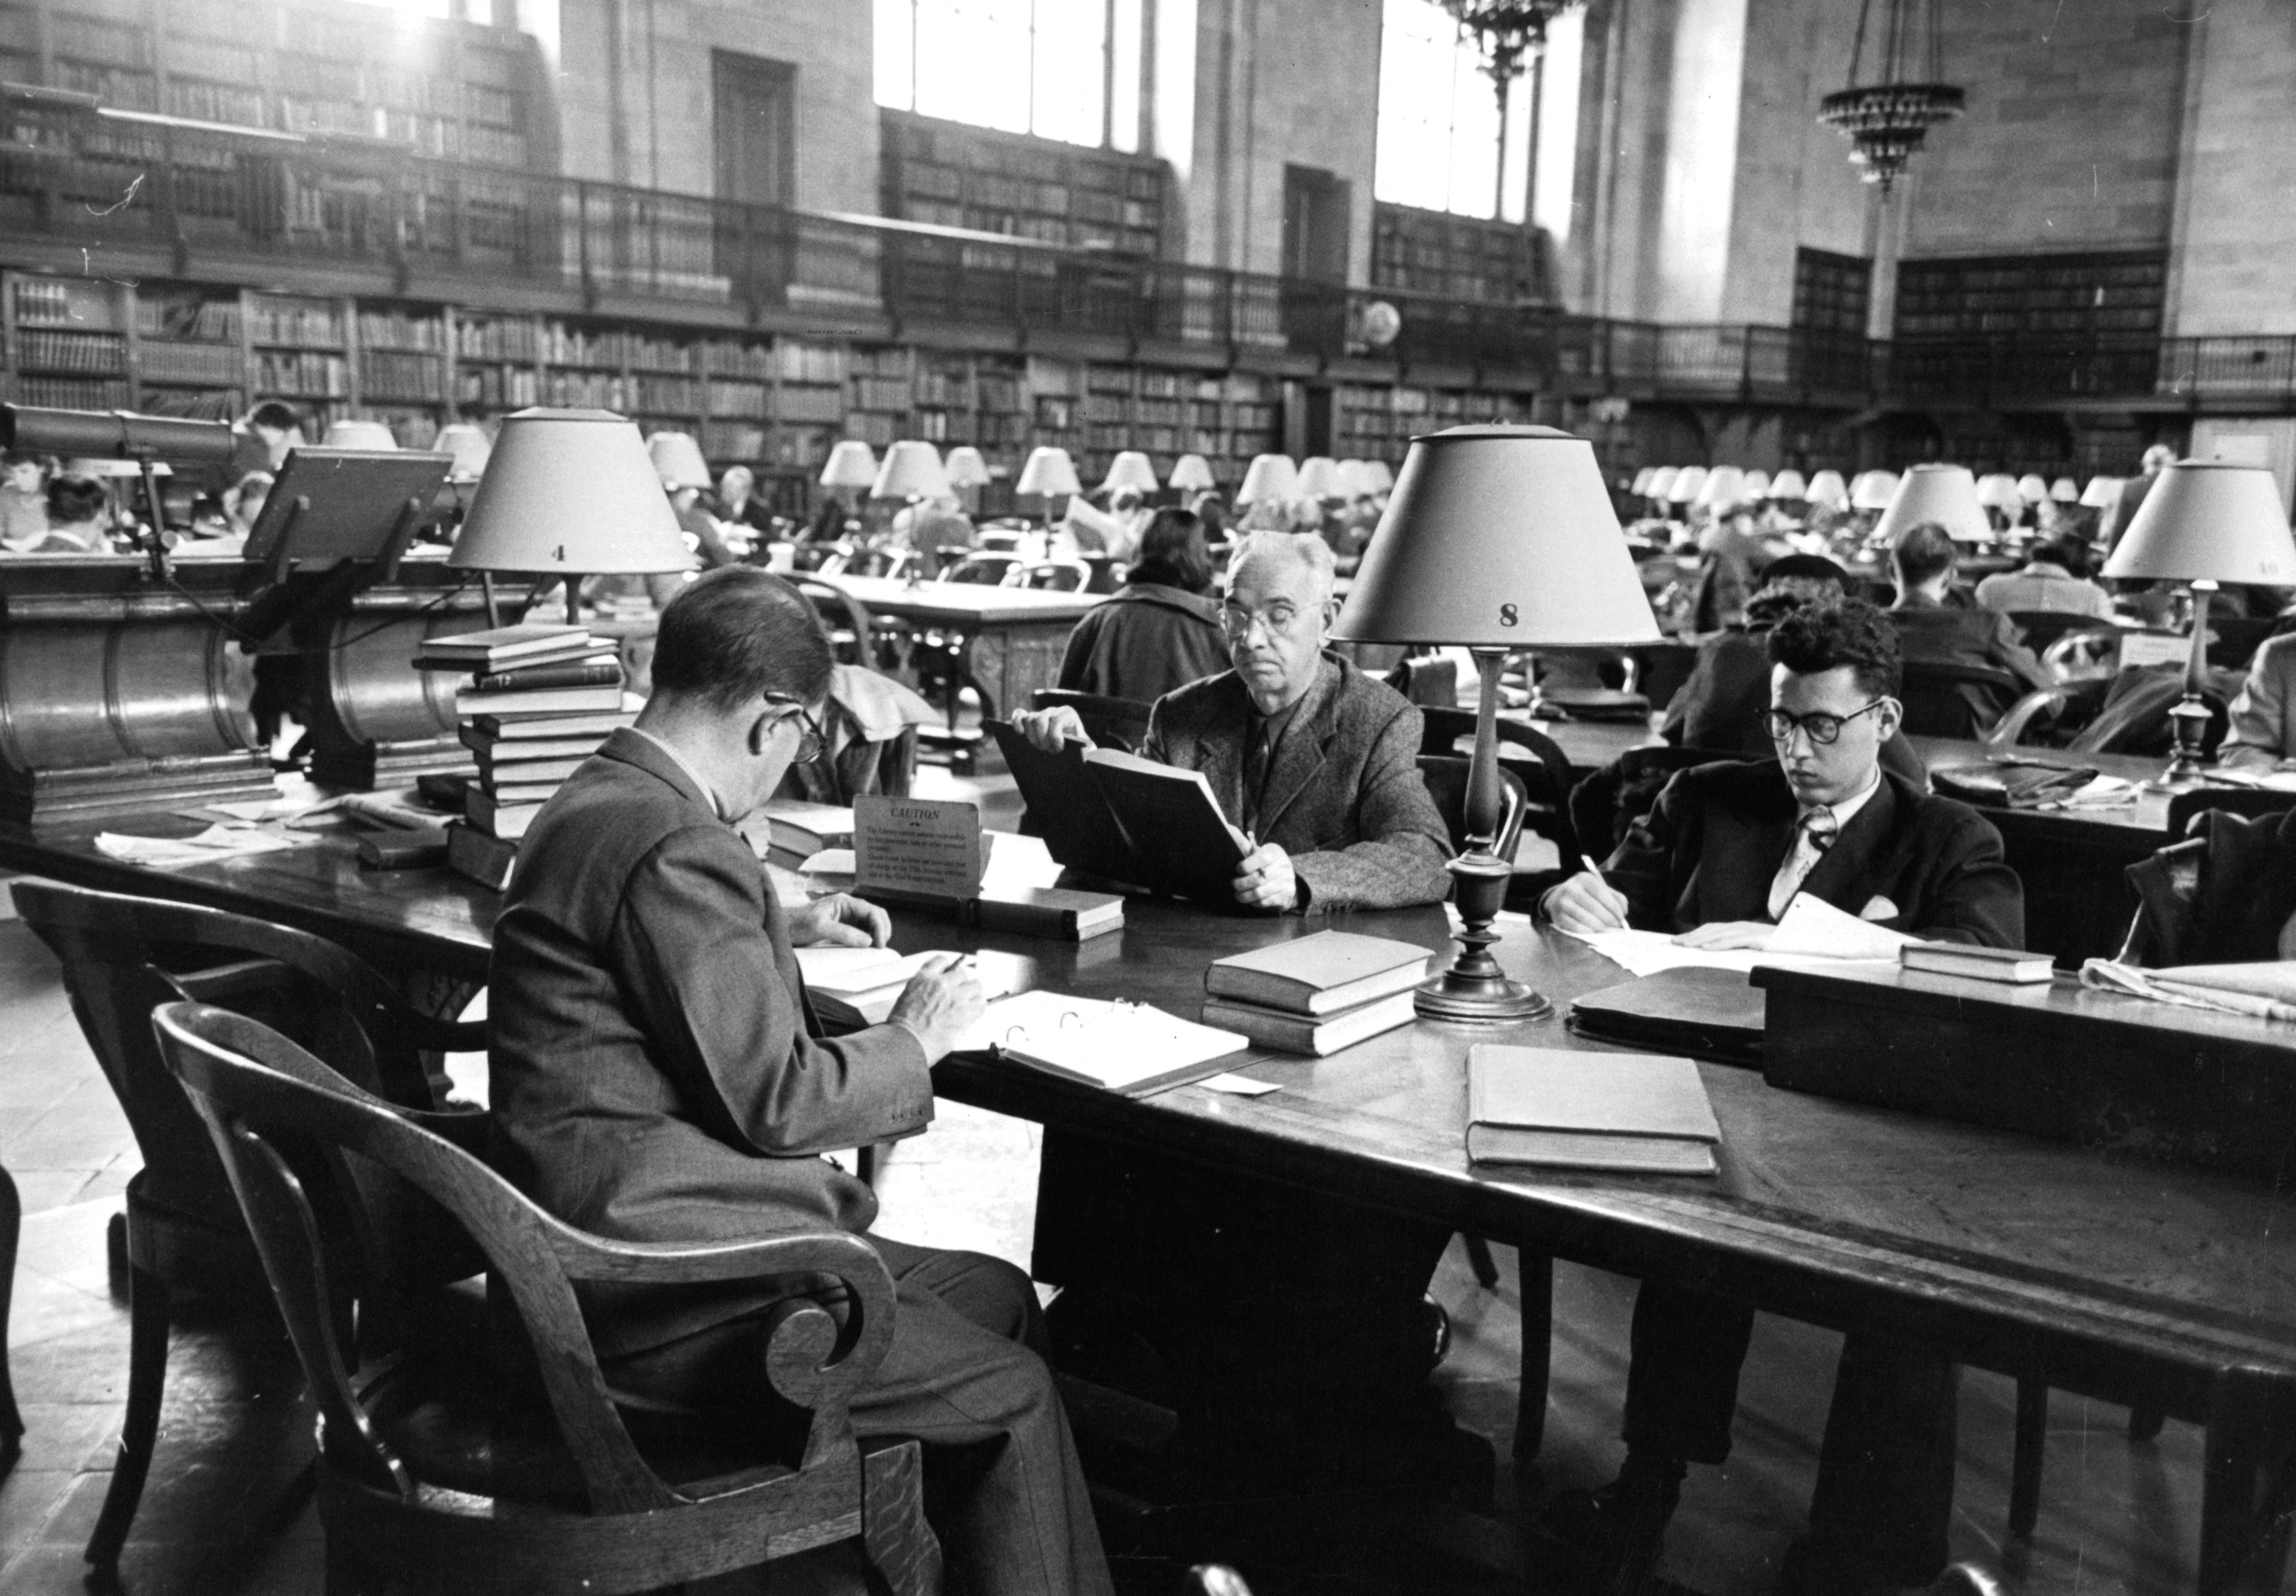 Three men share a table as they read in the South Reading Room at the main branch of the New York Public Library in New York City, New York, 1953.